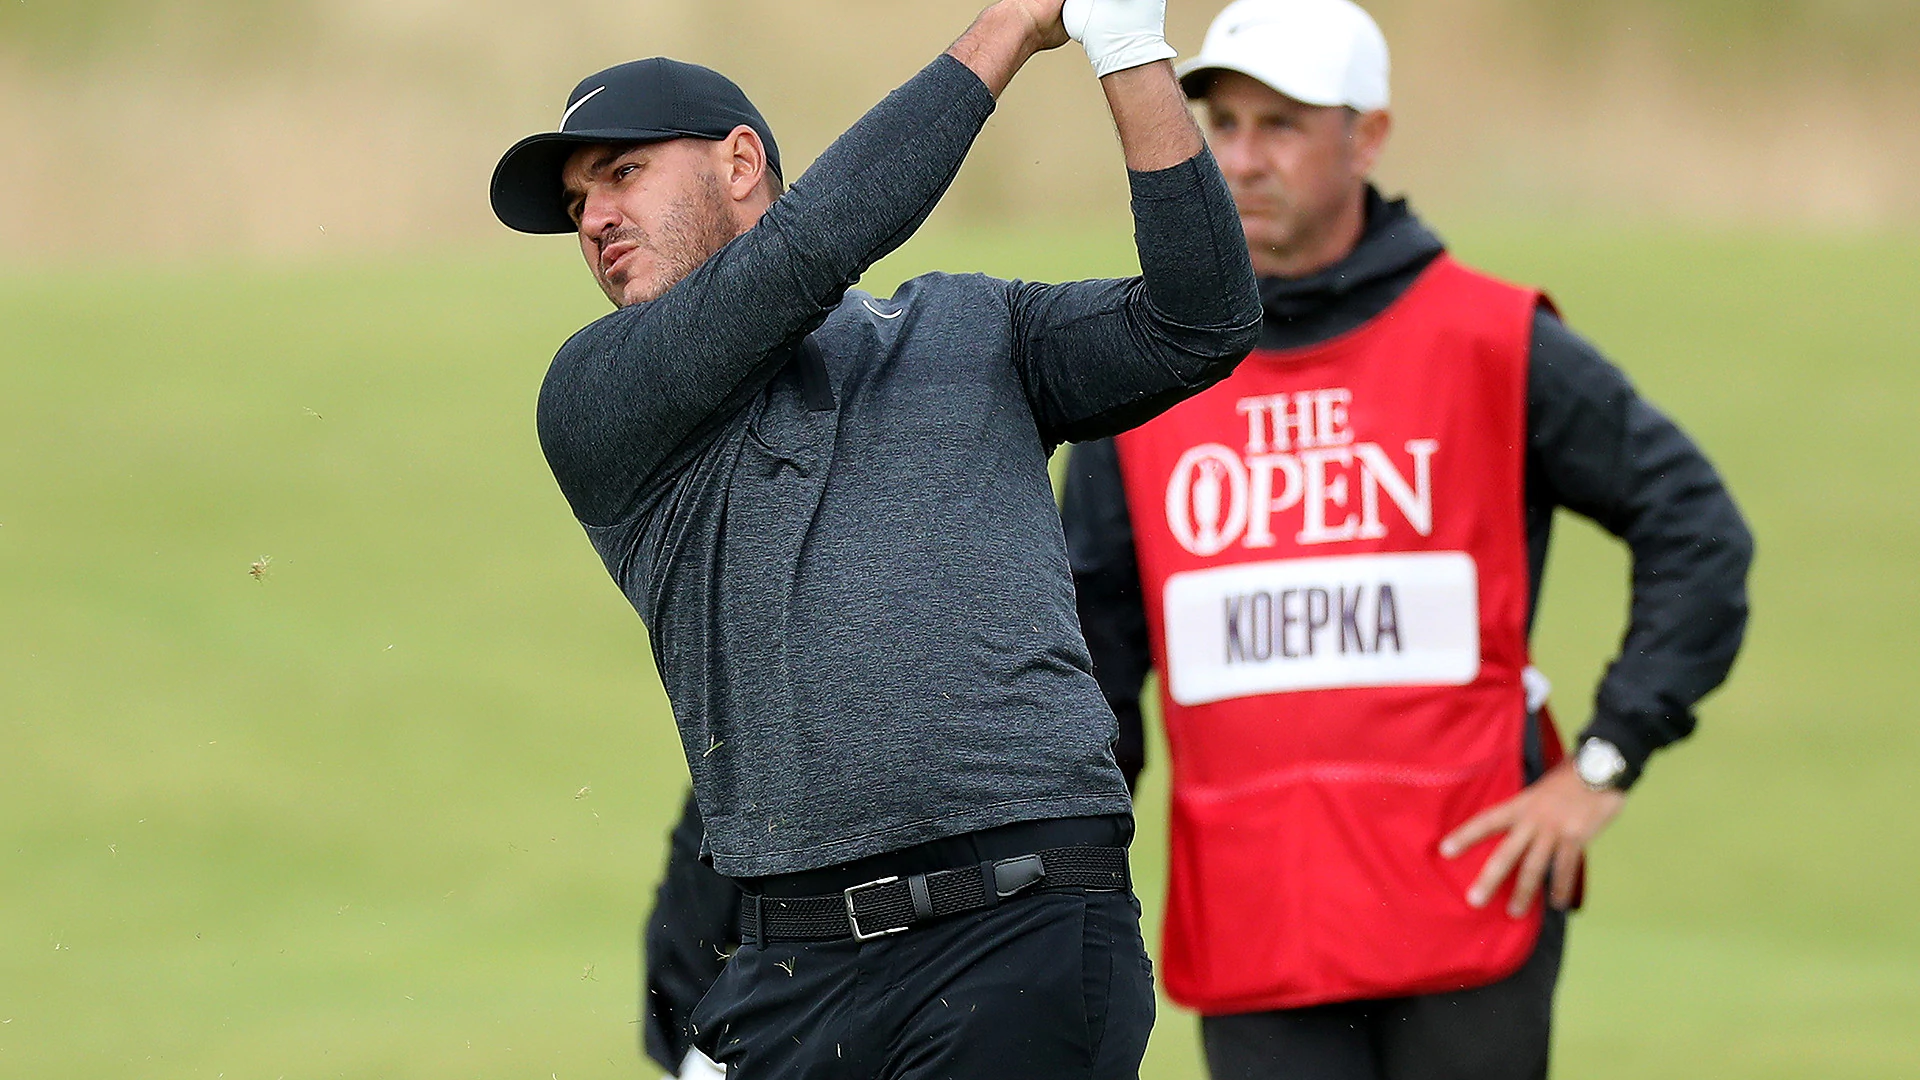 Report: Brooks Koepka withdraws from Travelers after caddie tests positive for COVID-19